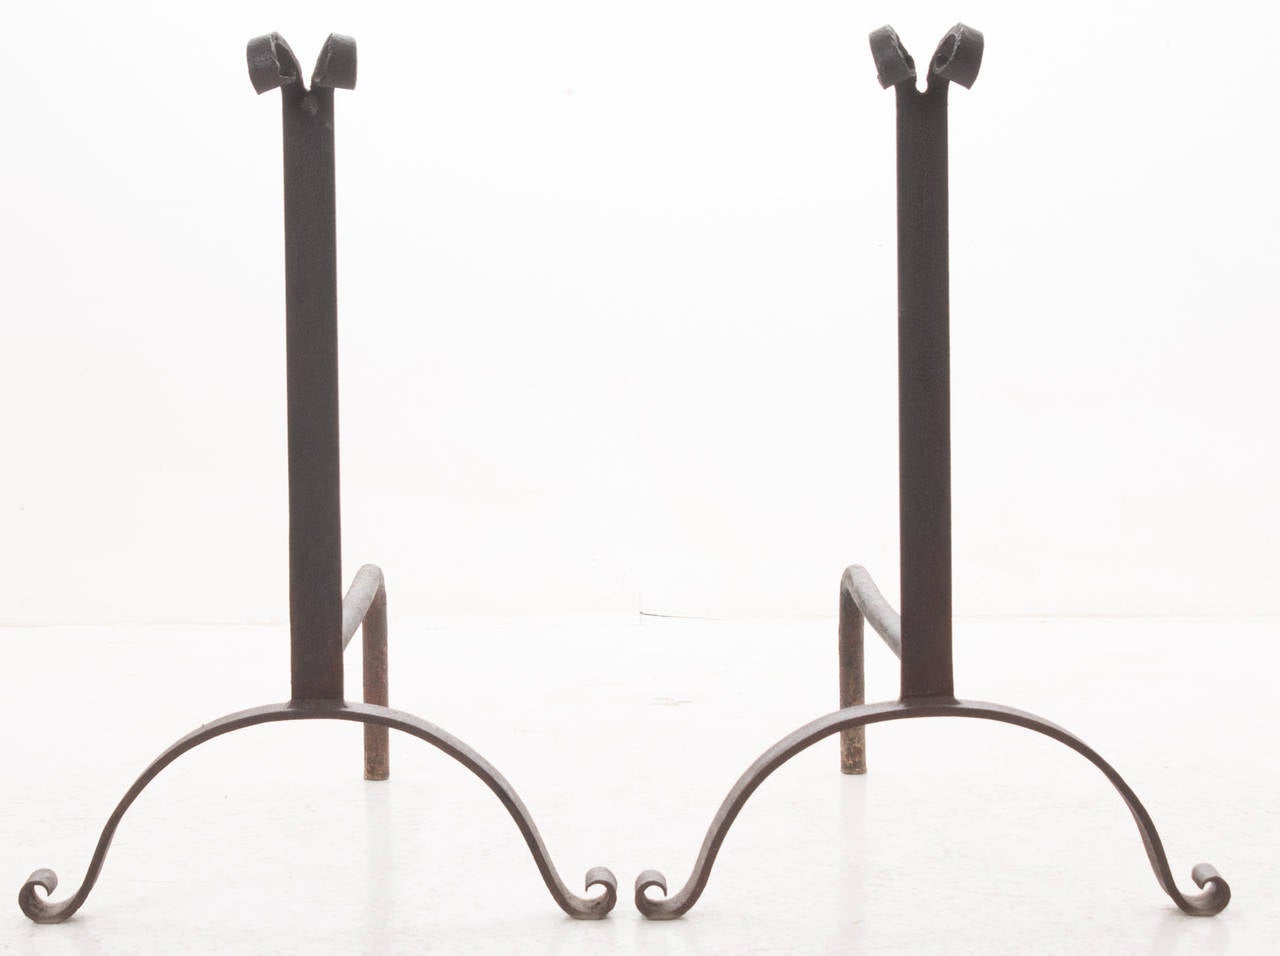 A large pair of hand forged iron andirons in a simple design, made in the early 1800s